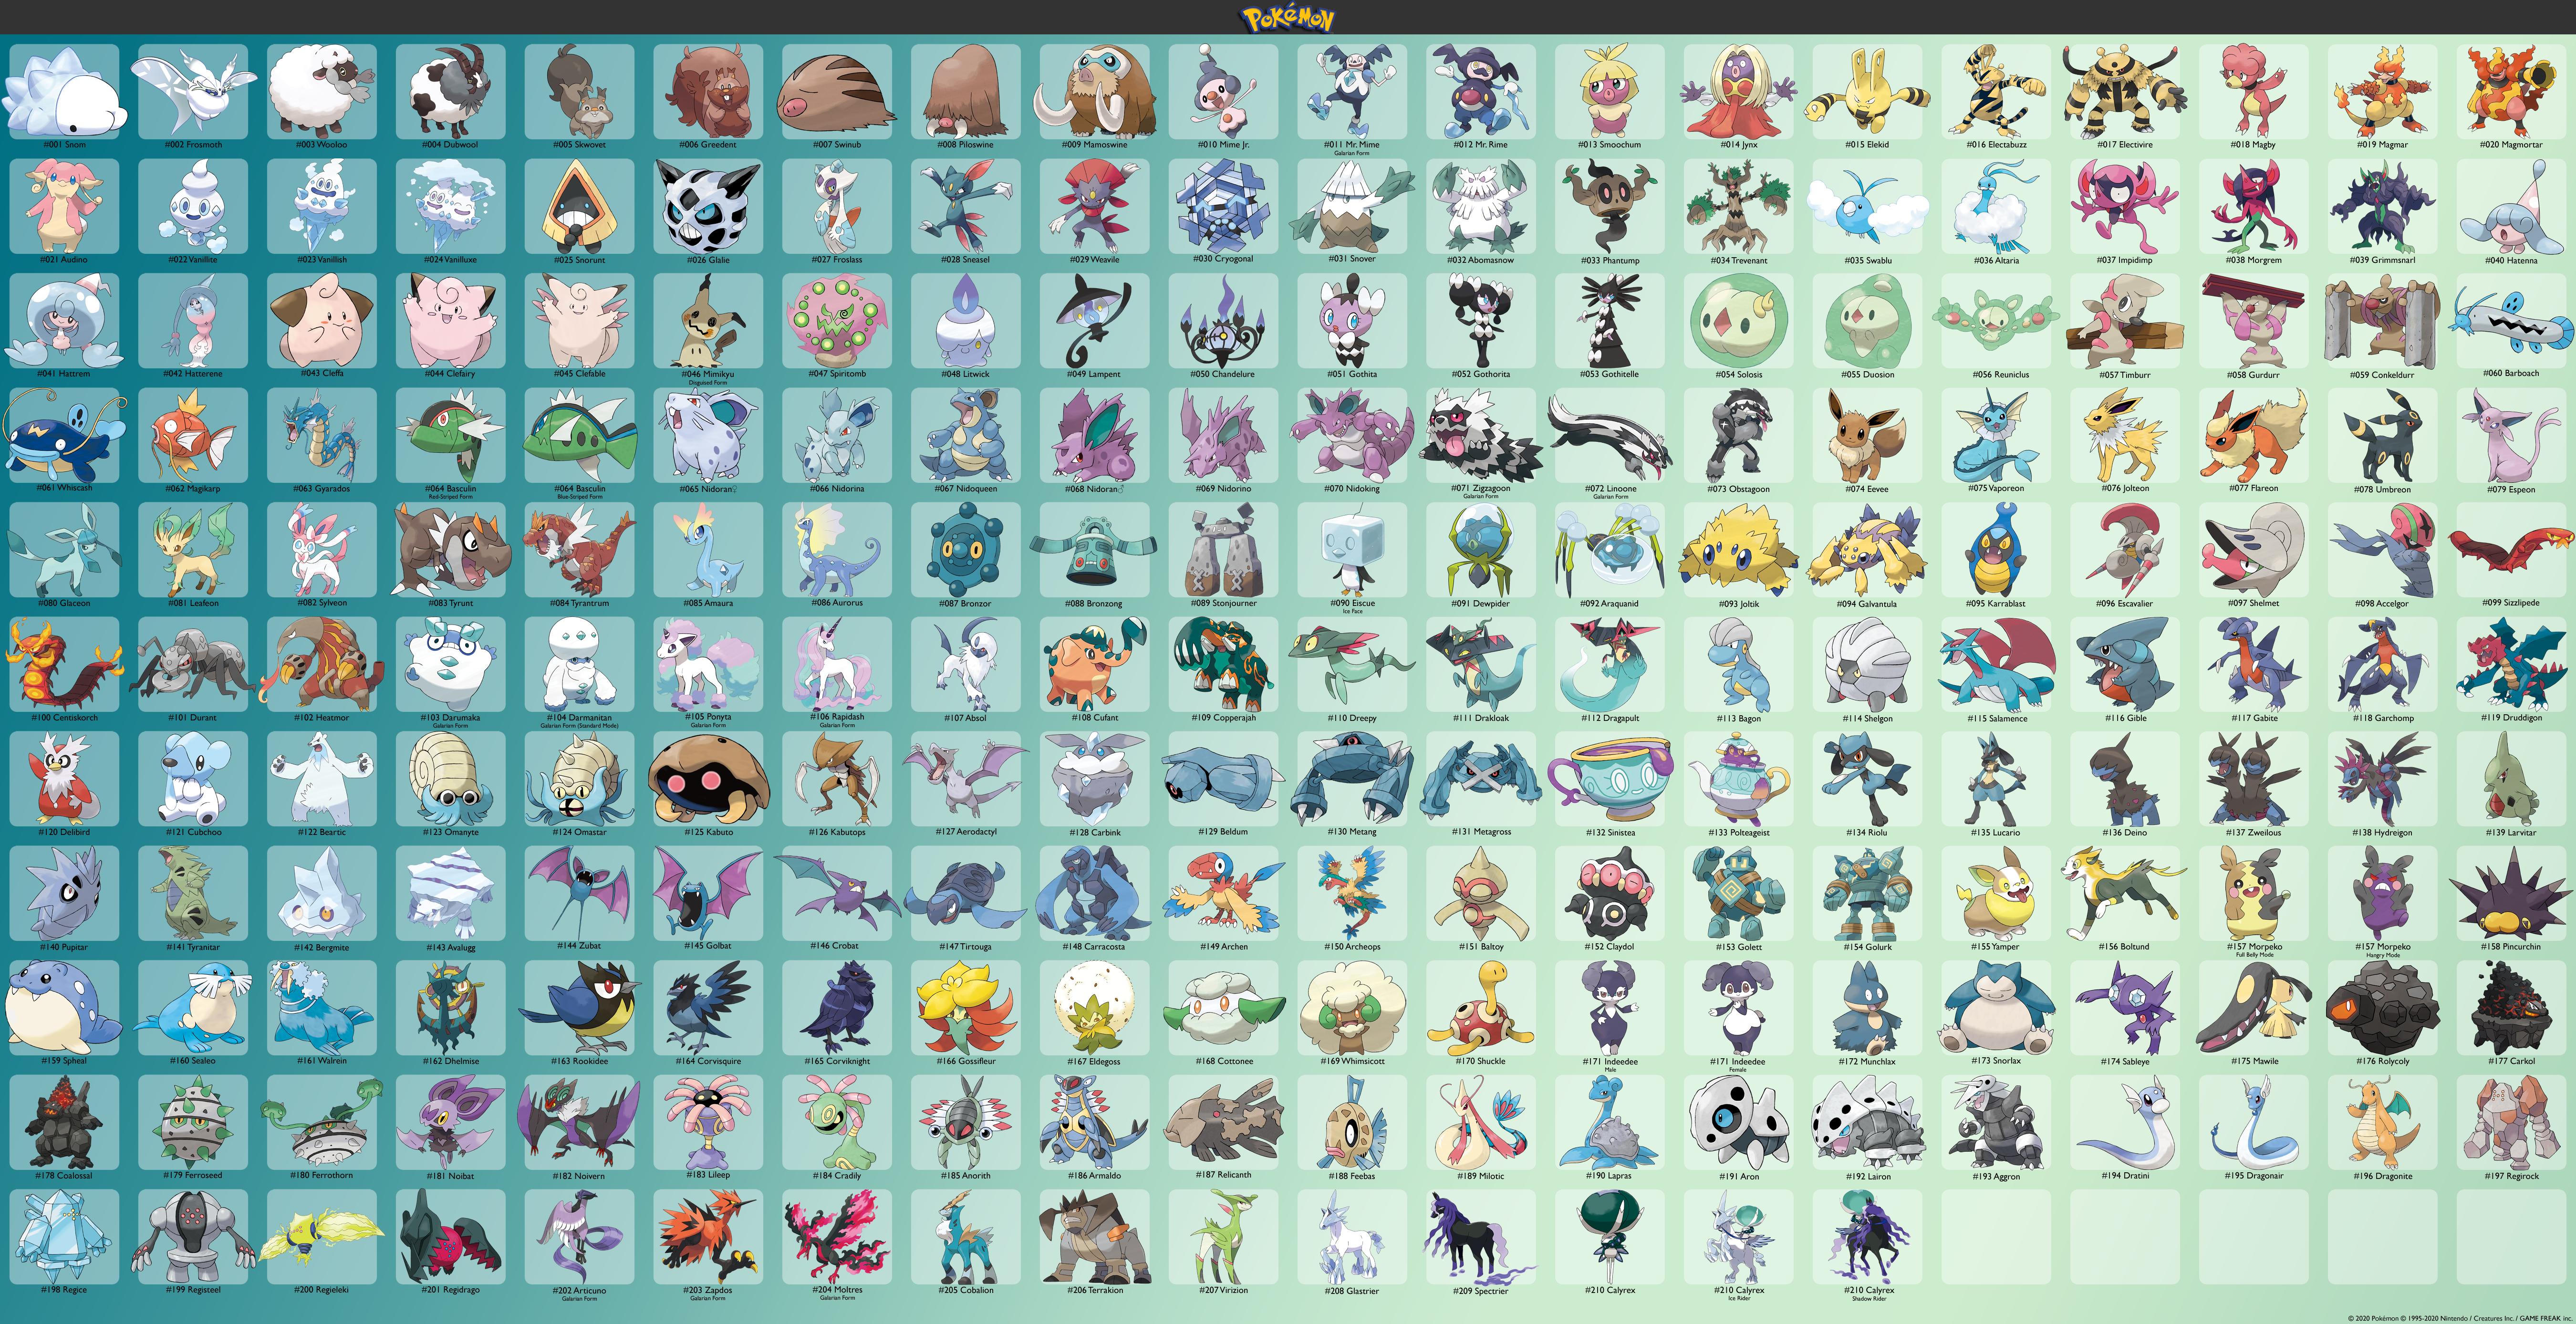 How to Complete the Crown Tundra Pokedex and Rewards